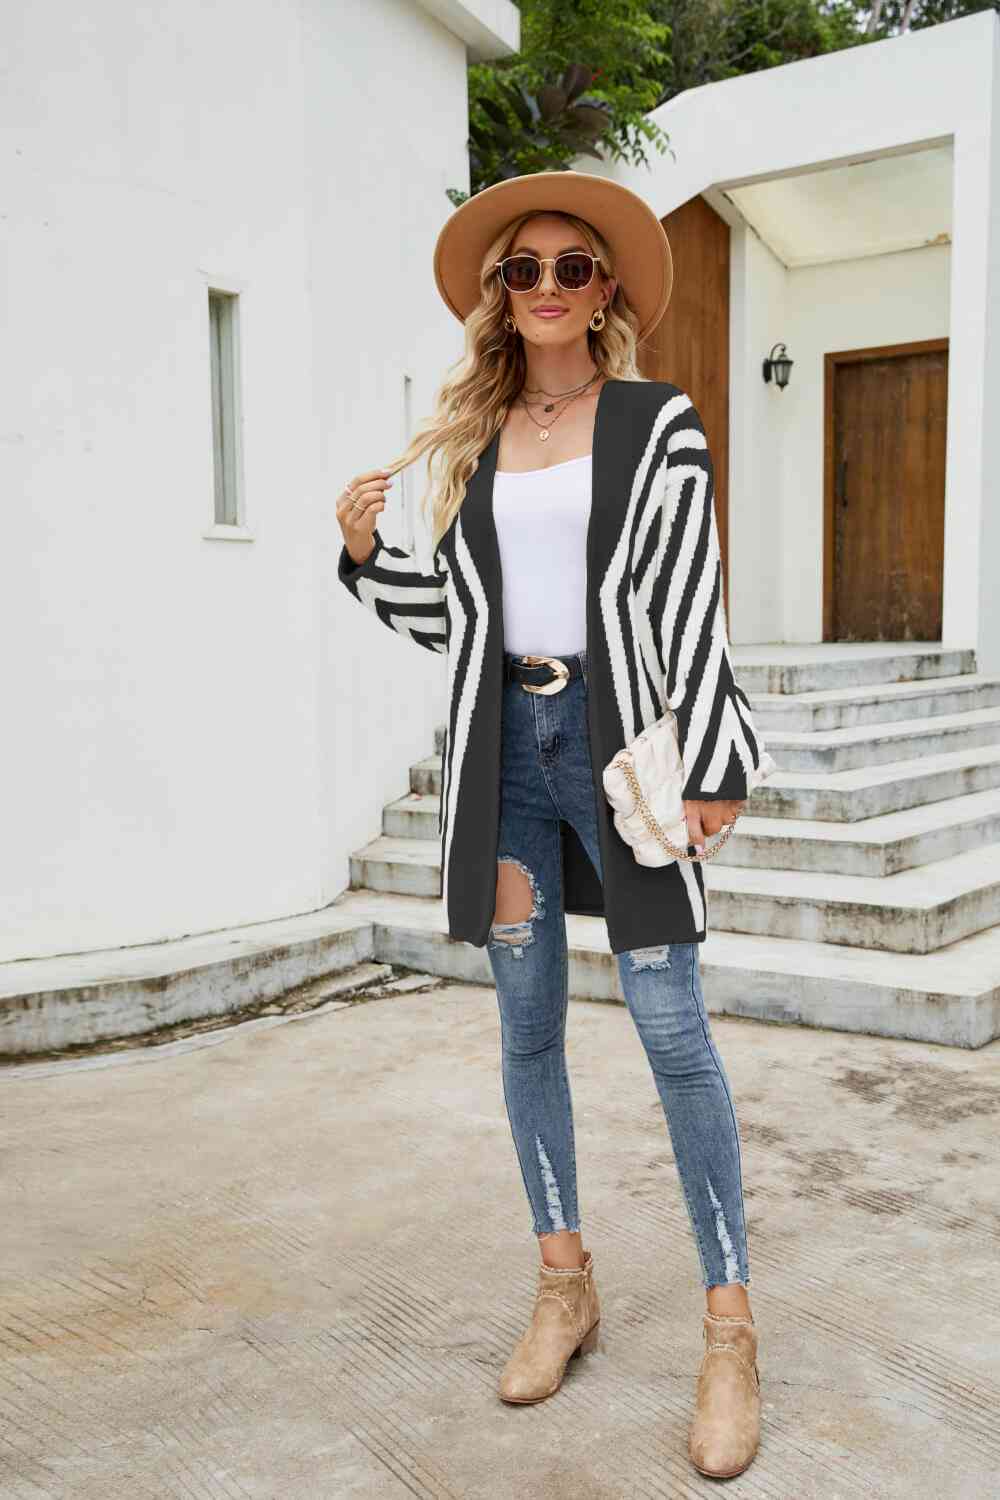 Woven Right Two-Tone Open Front Fuzzy Longline Cardigan